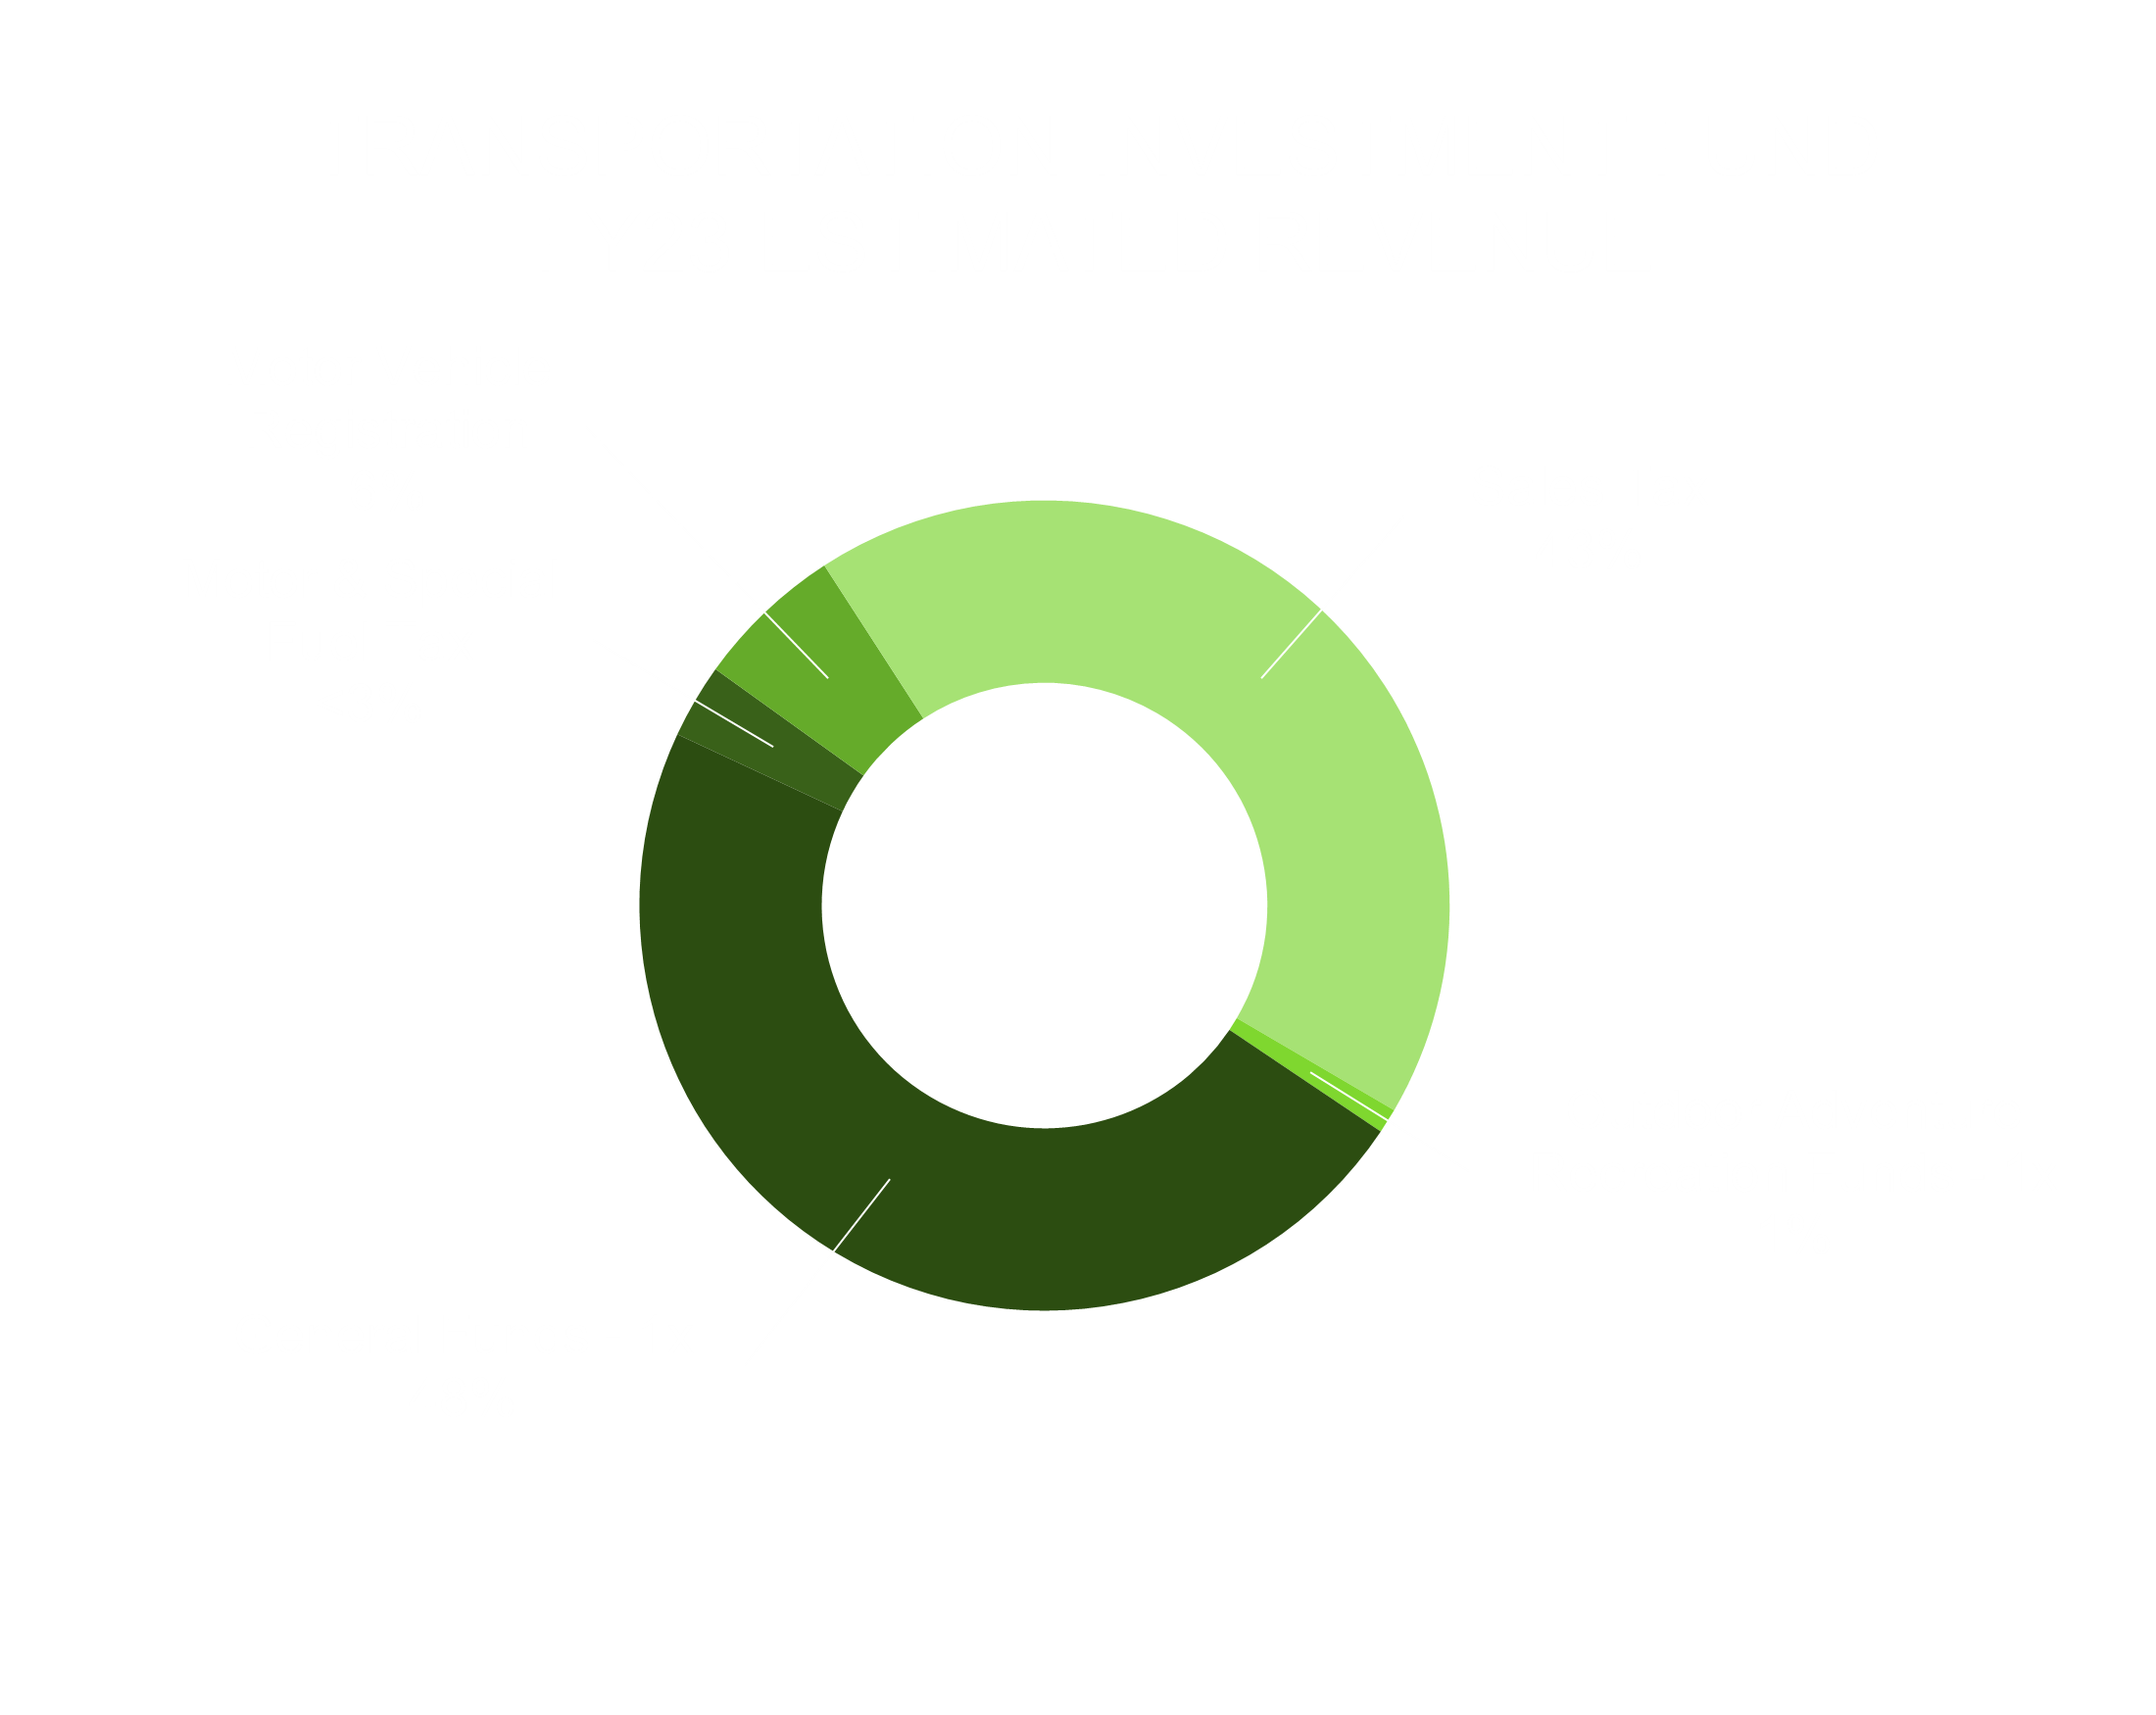 Transportation Investment Fund Estimated Revenue Chart shows General Funds 48%, Sales Tax 43%, Motor Vehicle Registration 6%, Motor Fuel and Special Fuel Tax 3% and Outdoor Adventure Recreation Funds 1%.